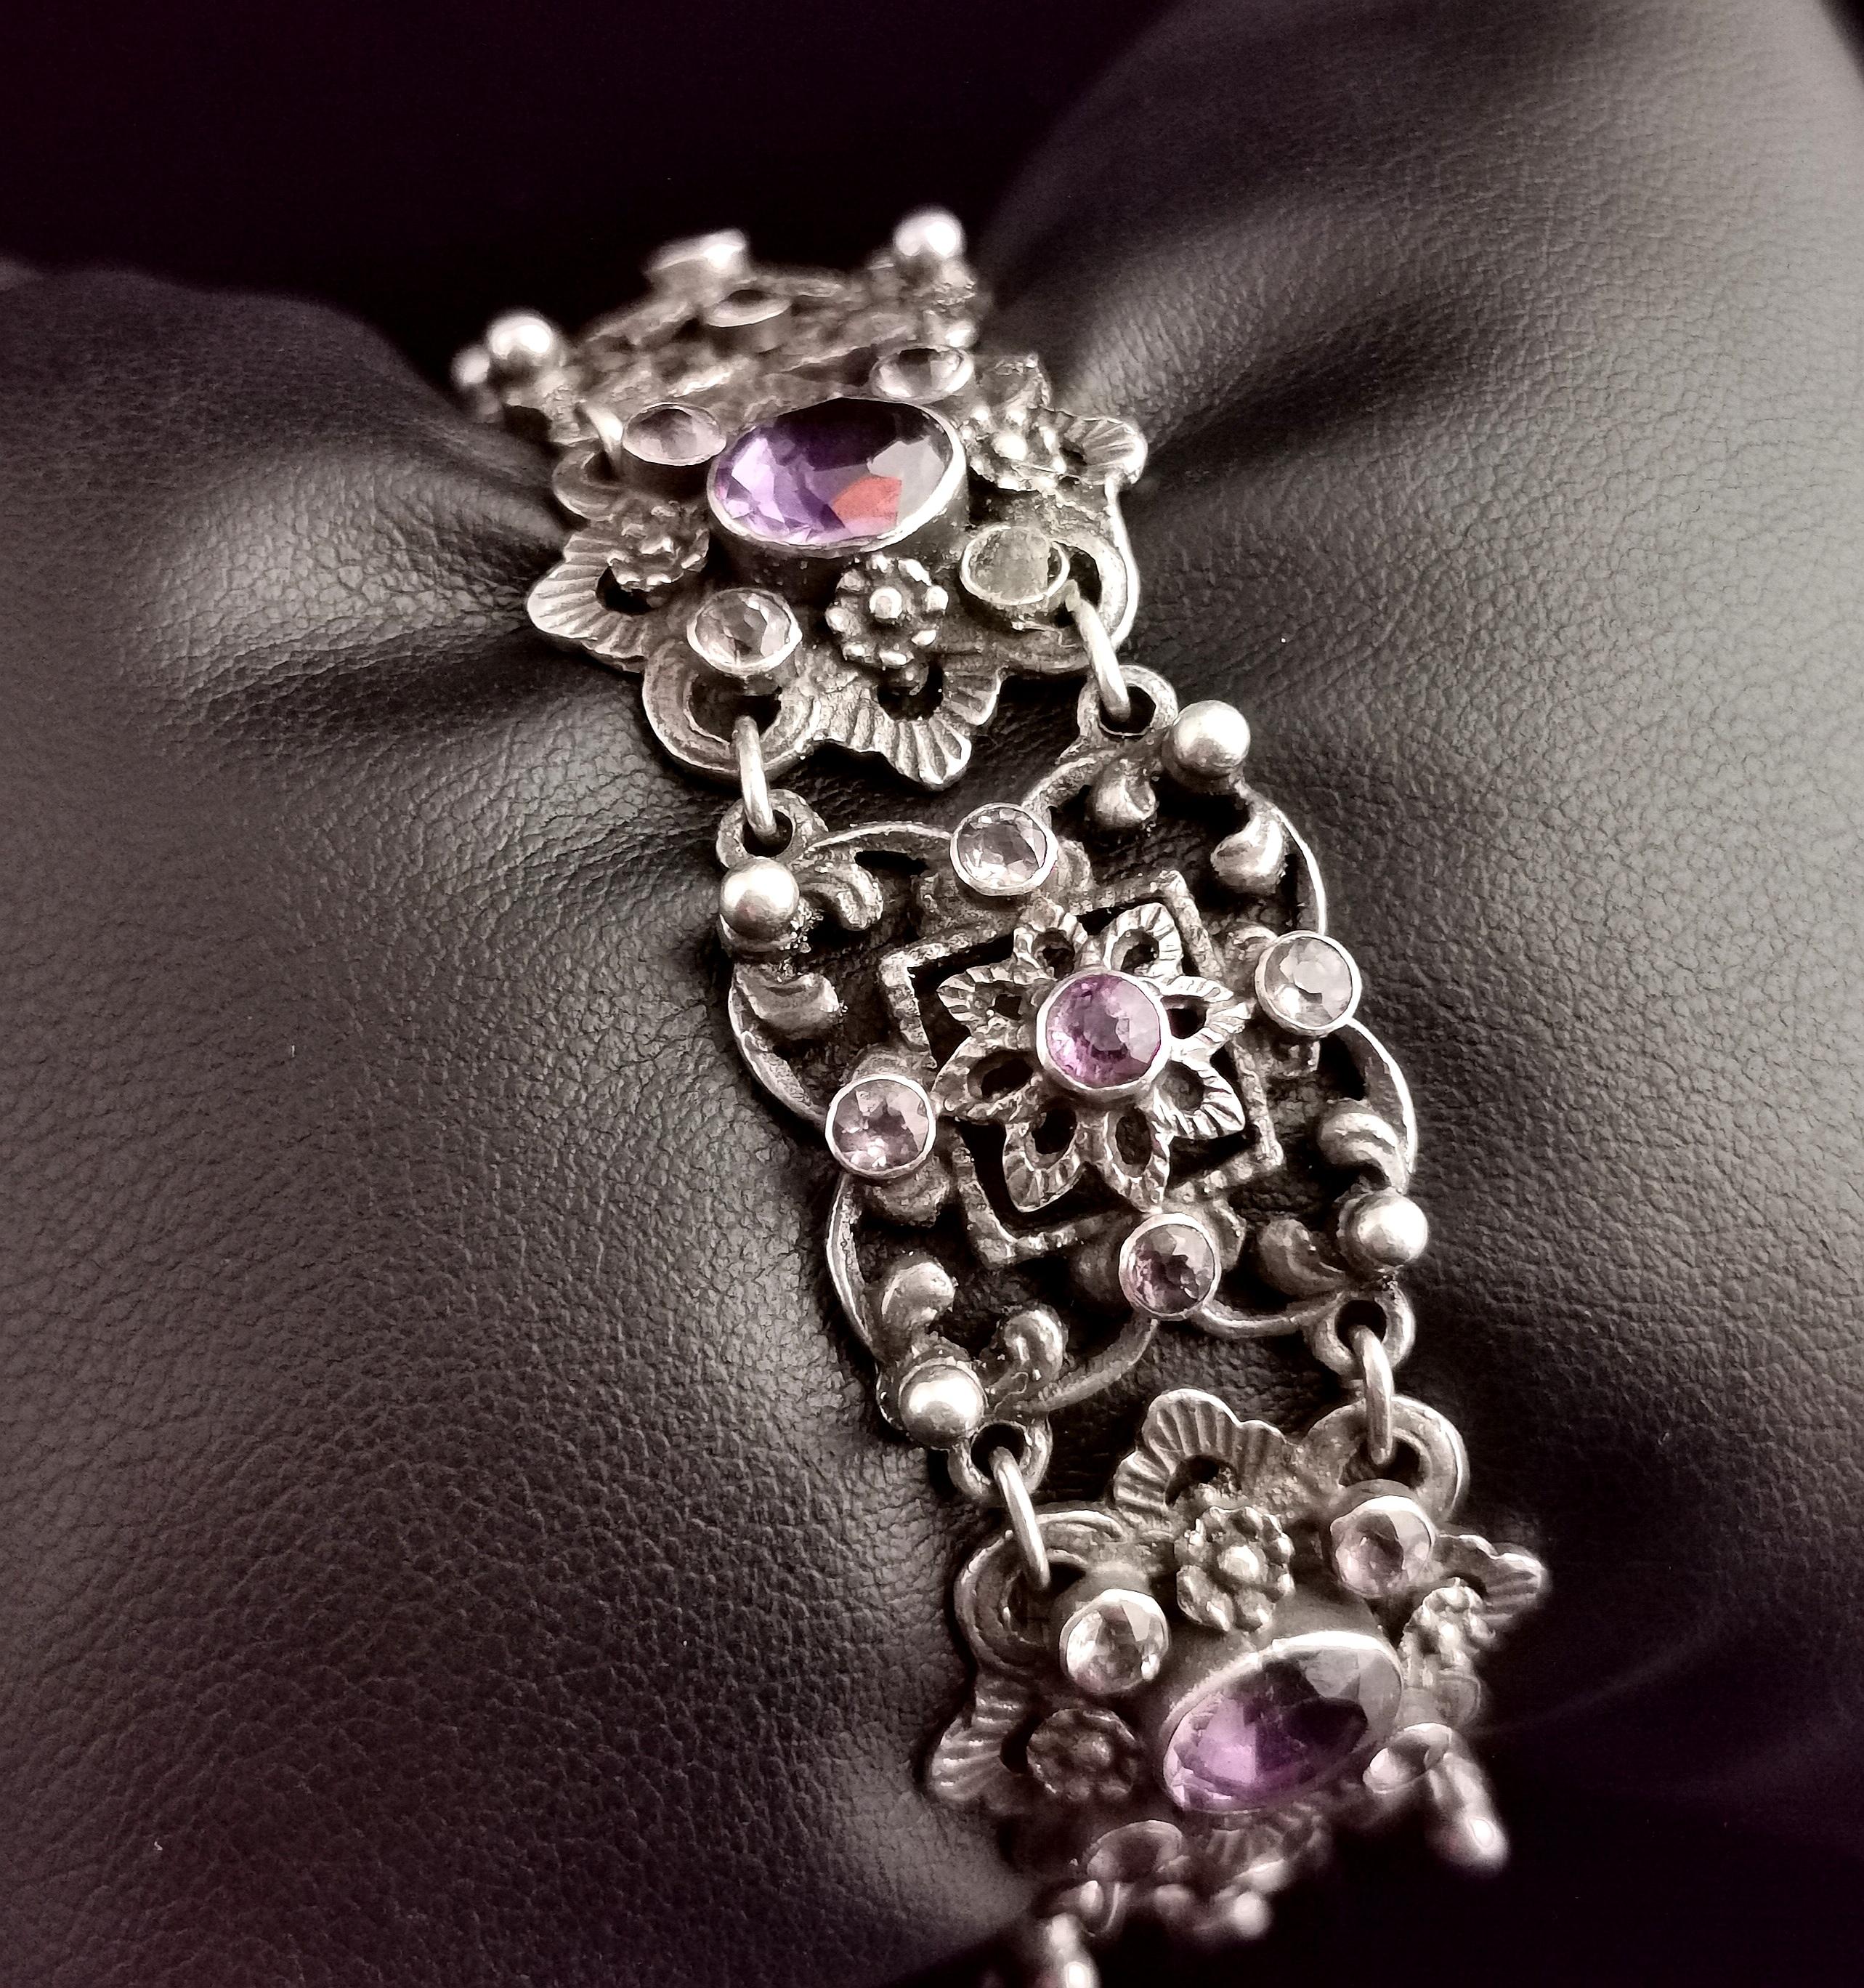 A beautiful antique Arts and Crafts design sterling silver and Amethyst bracelet.

This is a very pretty and well designed bracelet with elaborate floral design links which are joined together in an alternating pattern.

One type of link is set with